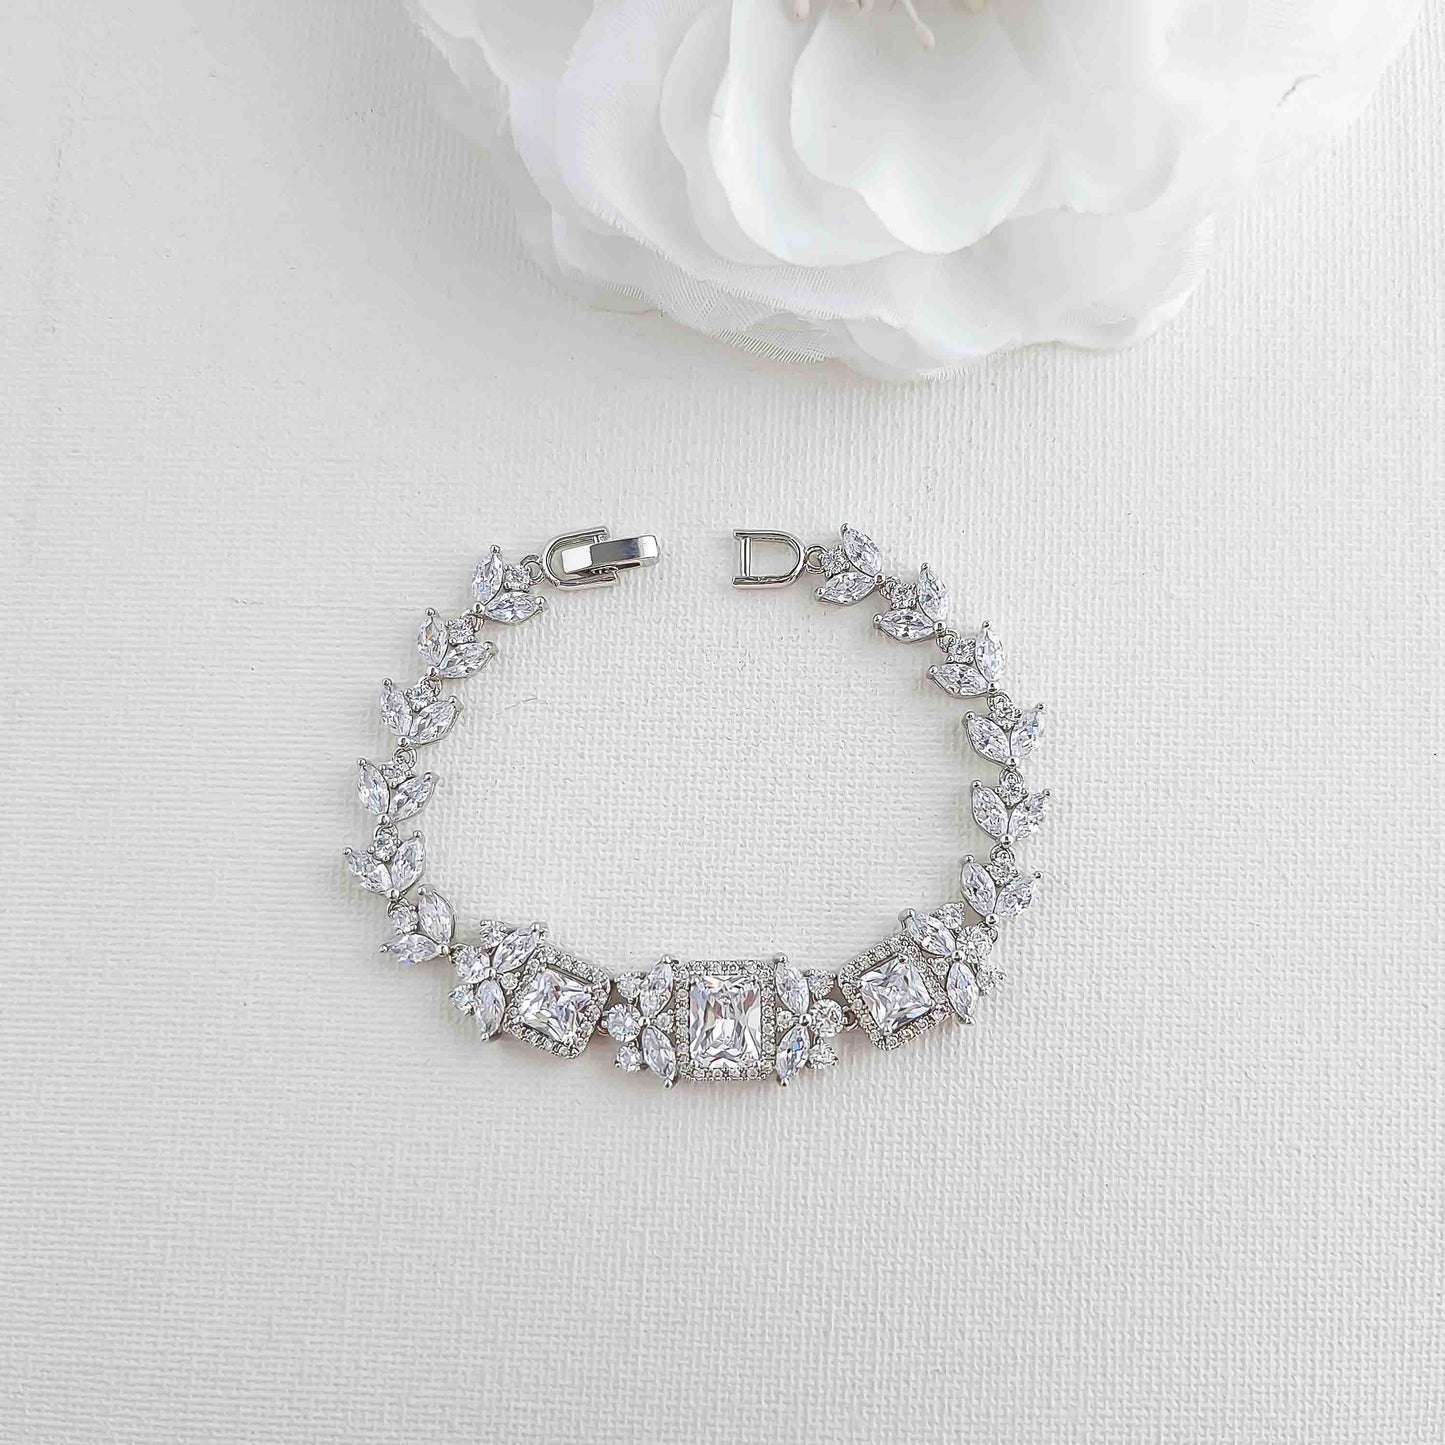 Bracelet Set for Wedding With Earrings-Lacie